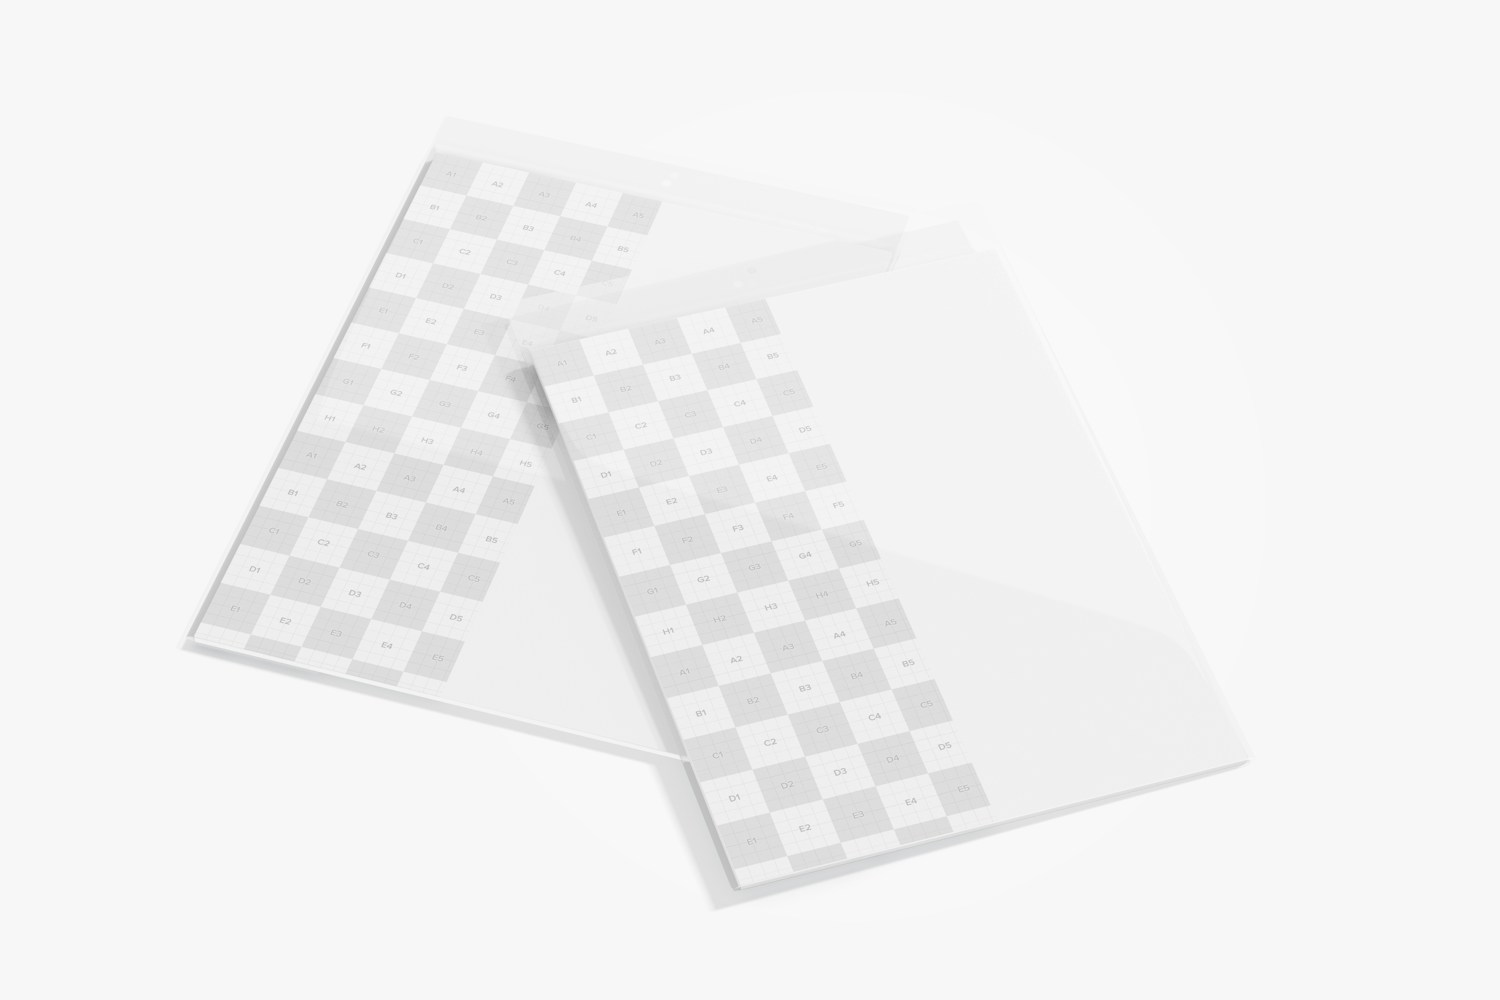 Sheet Packs with Label Mockup